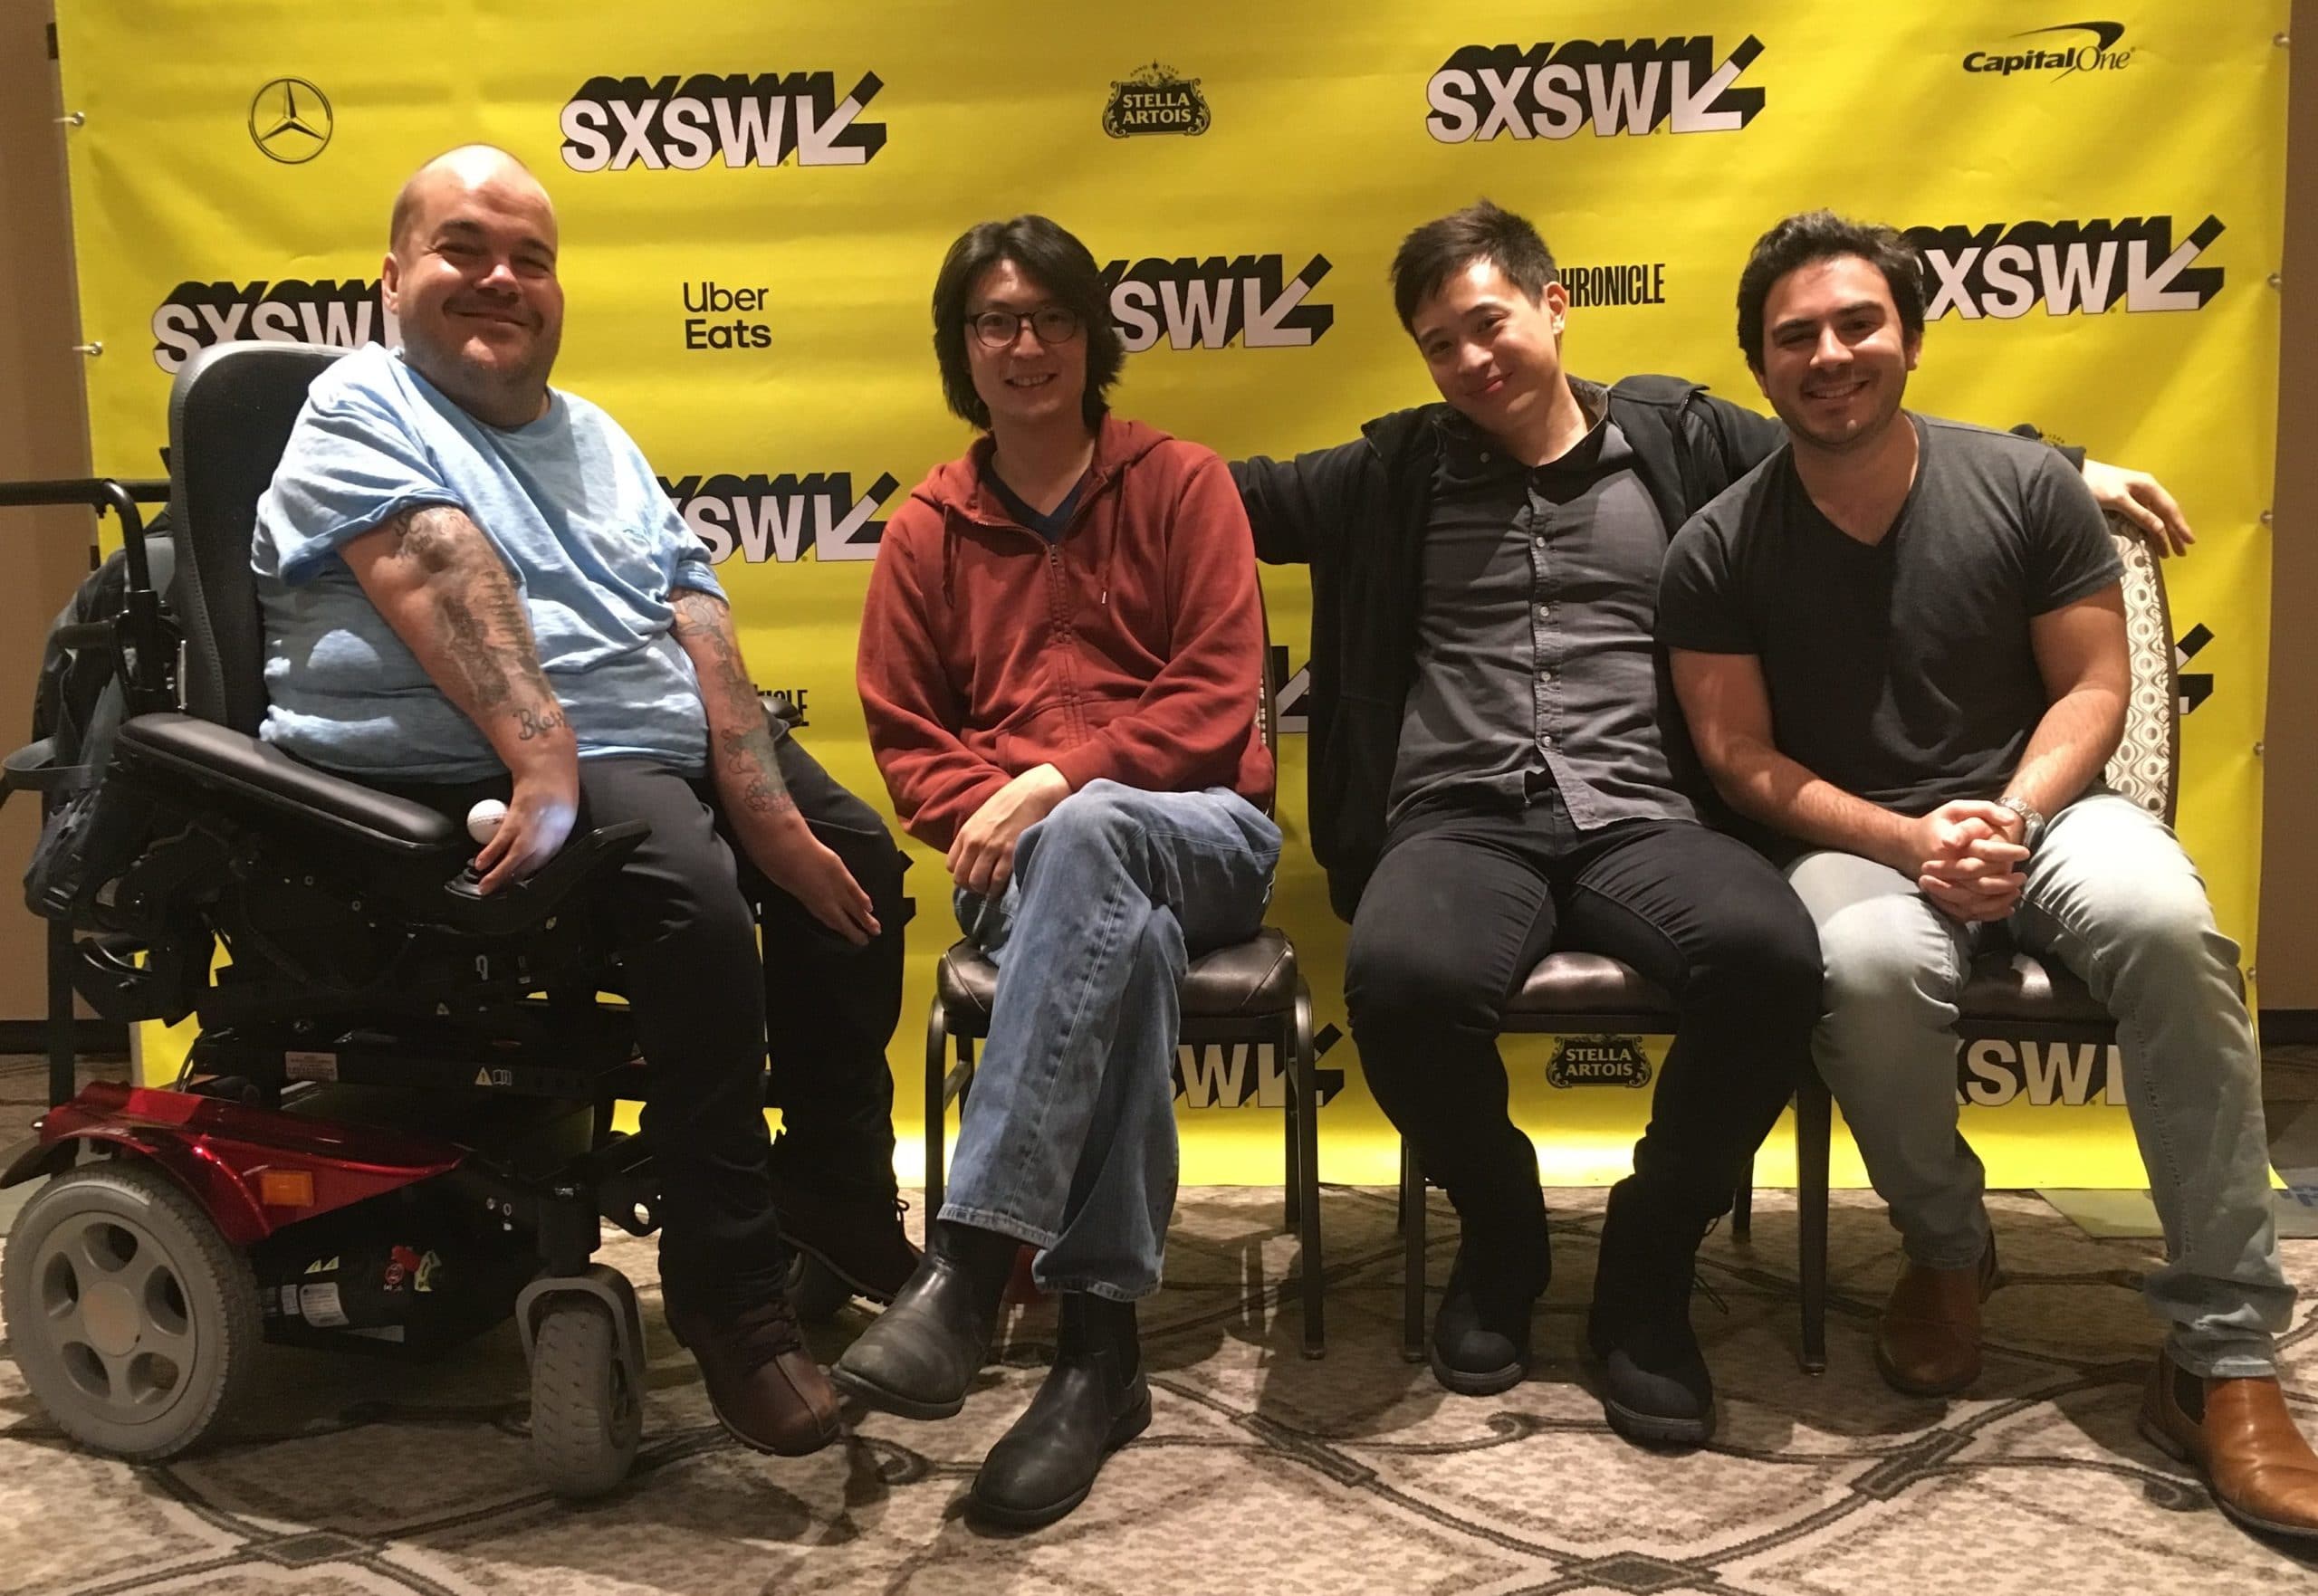 Asta Philpot, Richard Wong, Hayden Szeto, and Grant Rosenmeyer seated in front of yellow SXSW banner